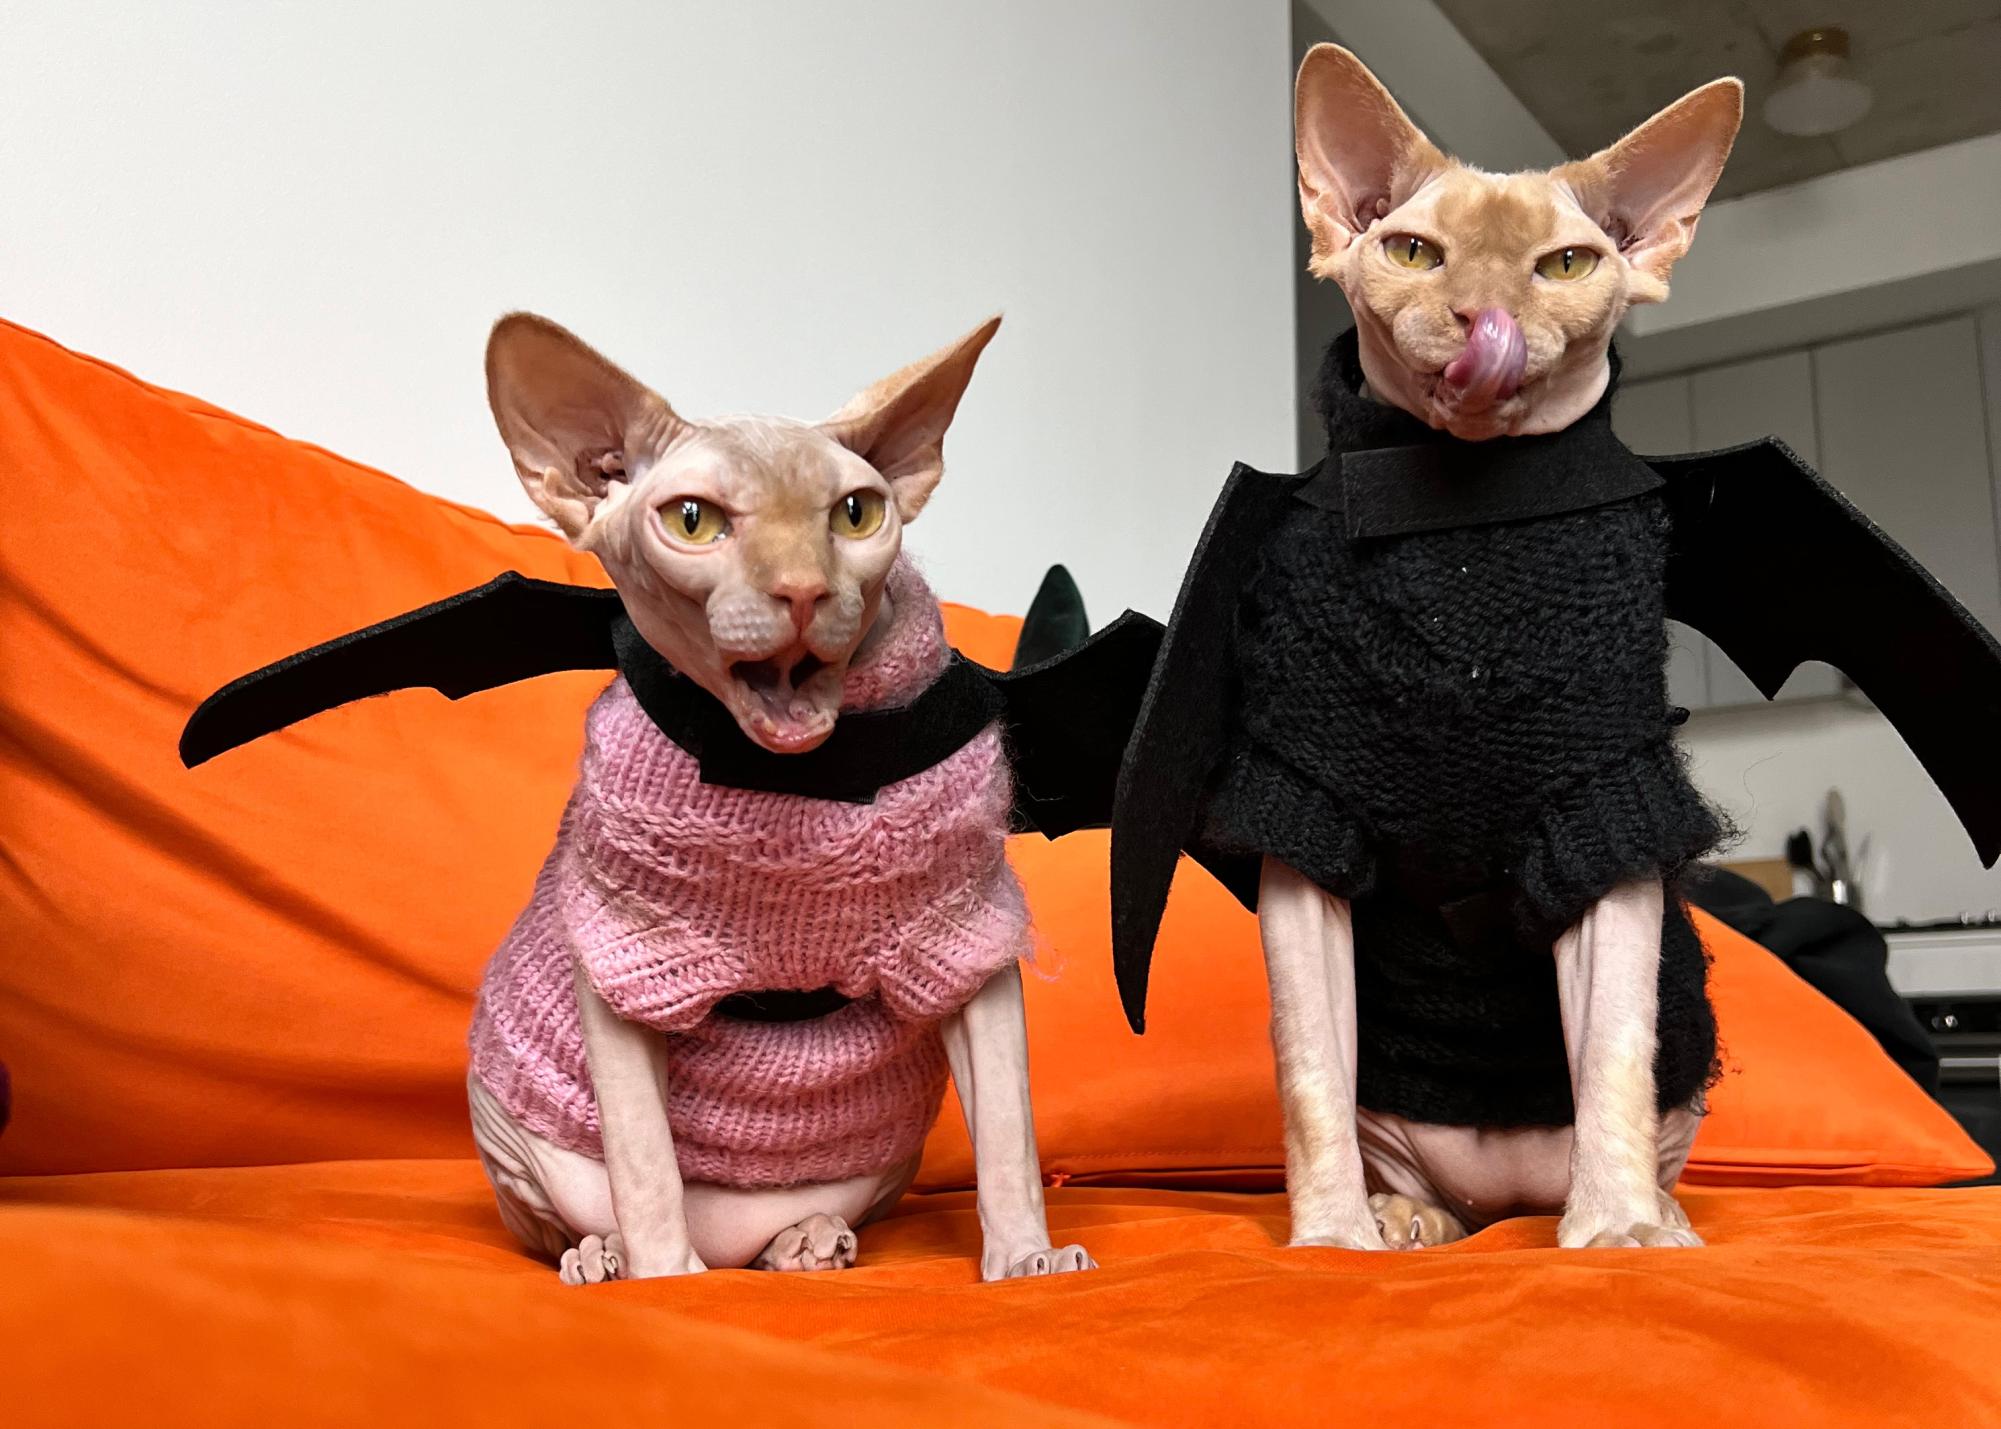 Hairless cats living at the Sawbuck apartments, Peep and Mac. They stay warm by wearing sweaters and bat wings.